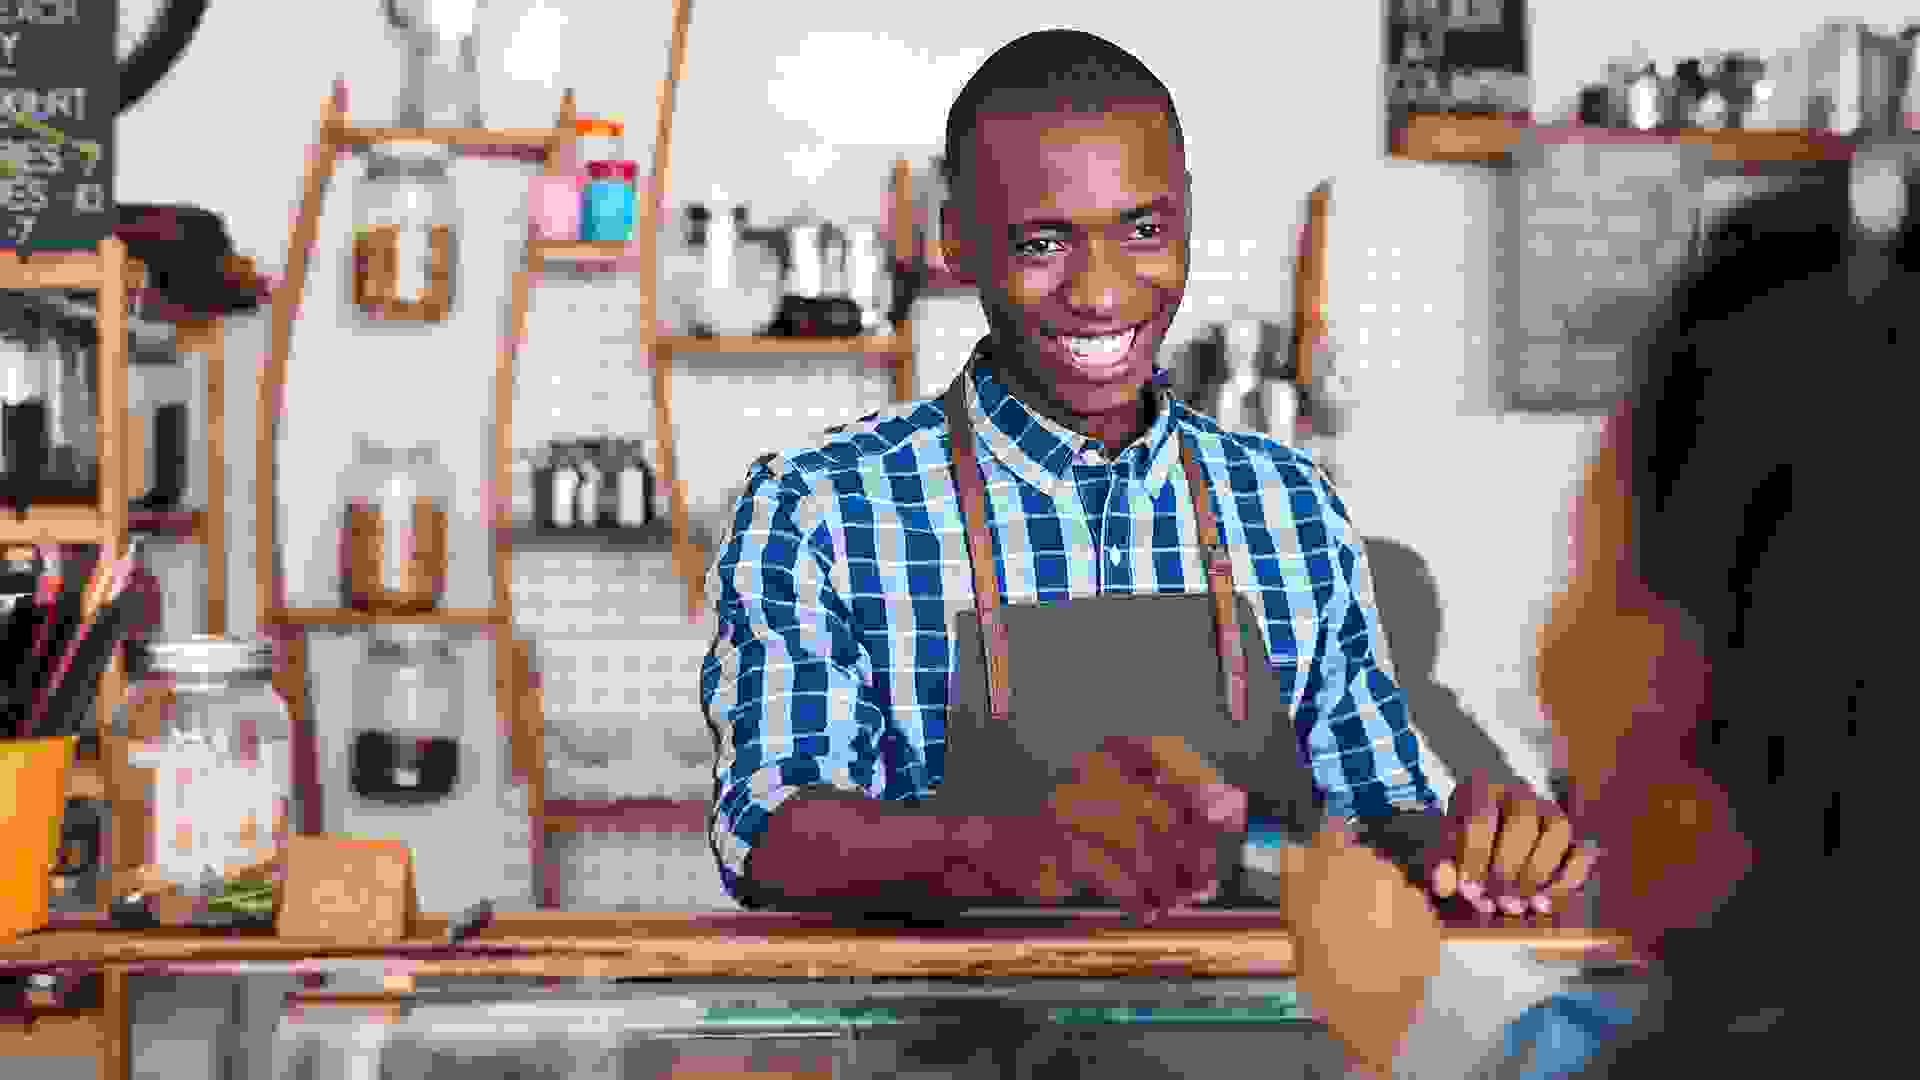 Smiling barista standing behind a counter in a cafe taking a credit card from a customer to pay for her purchase - Image.